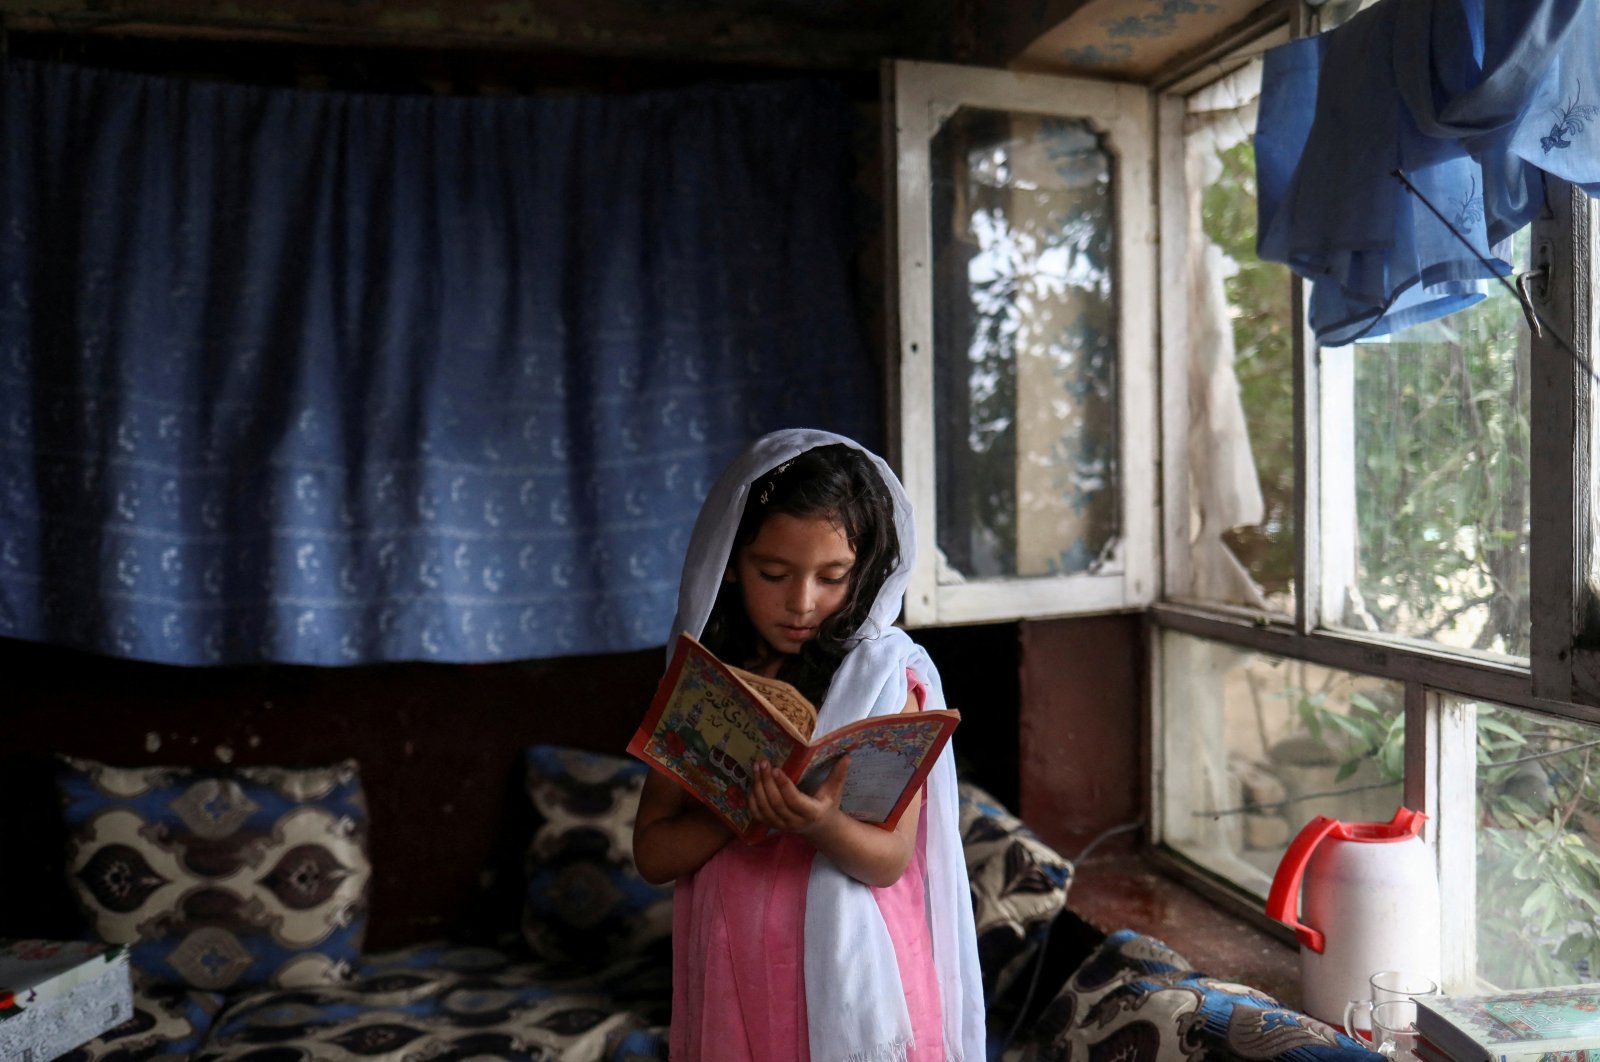 An Afghan girl reads a book inside her home in Kabul, Afghanistan, June 13, 2022. (Reuters Photo)